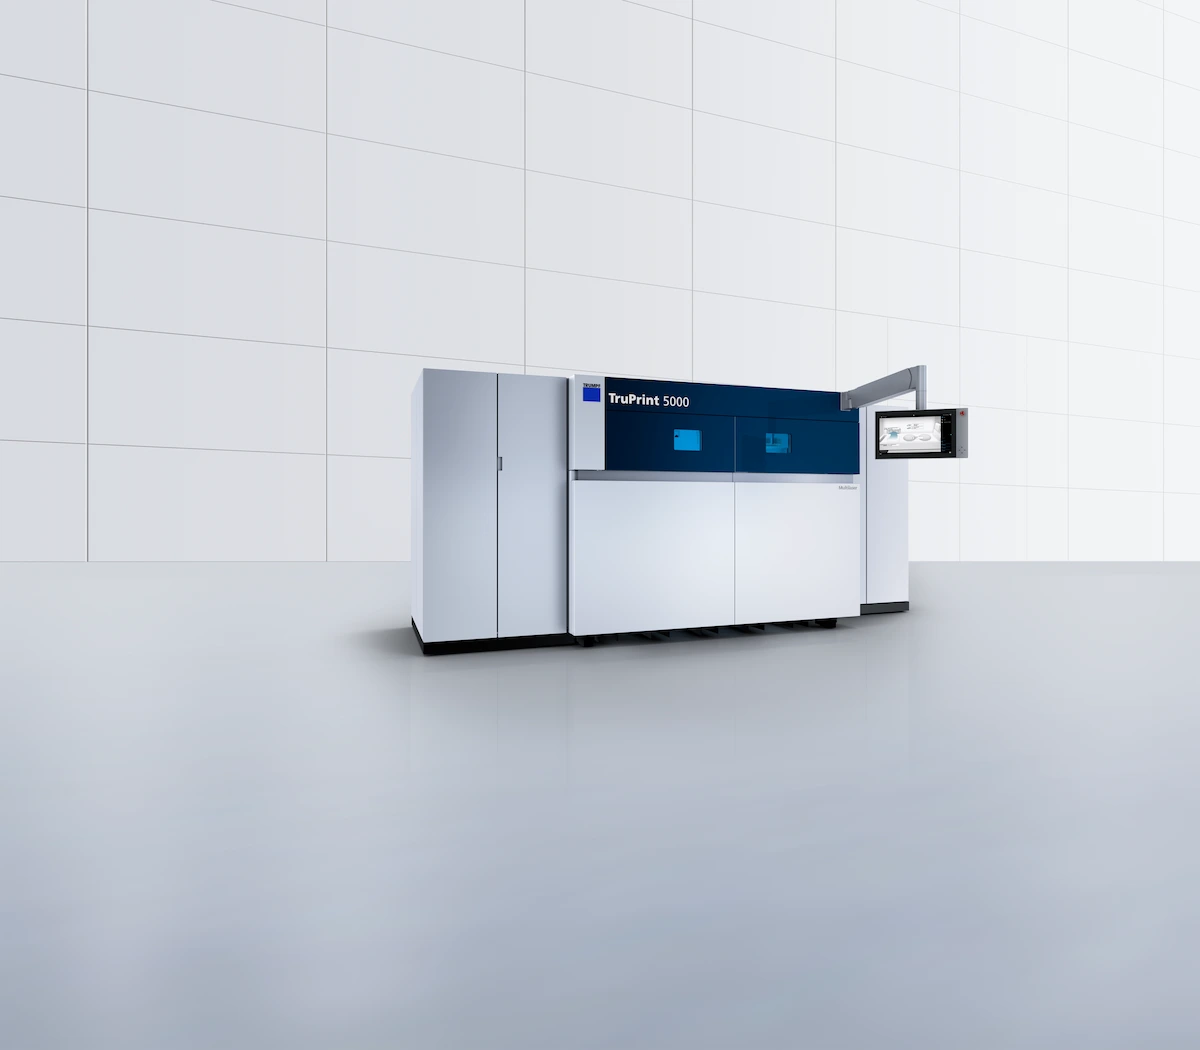 3D Printers for additive manufacturing - Trumpf TruPrint 5000 Adaptable and ergonomic